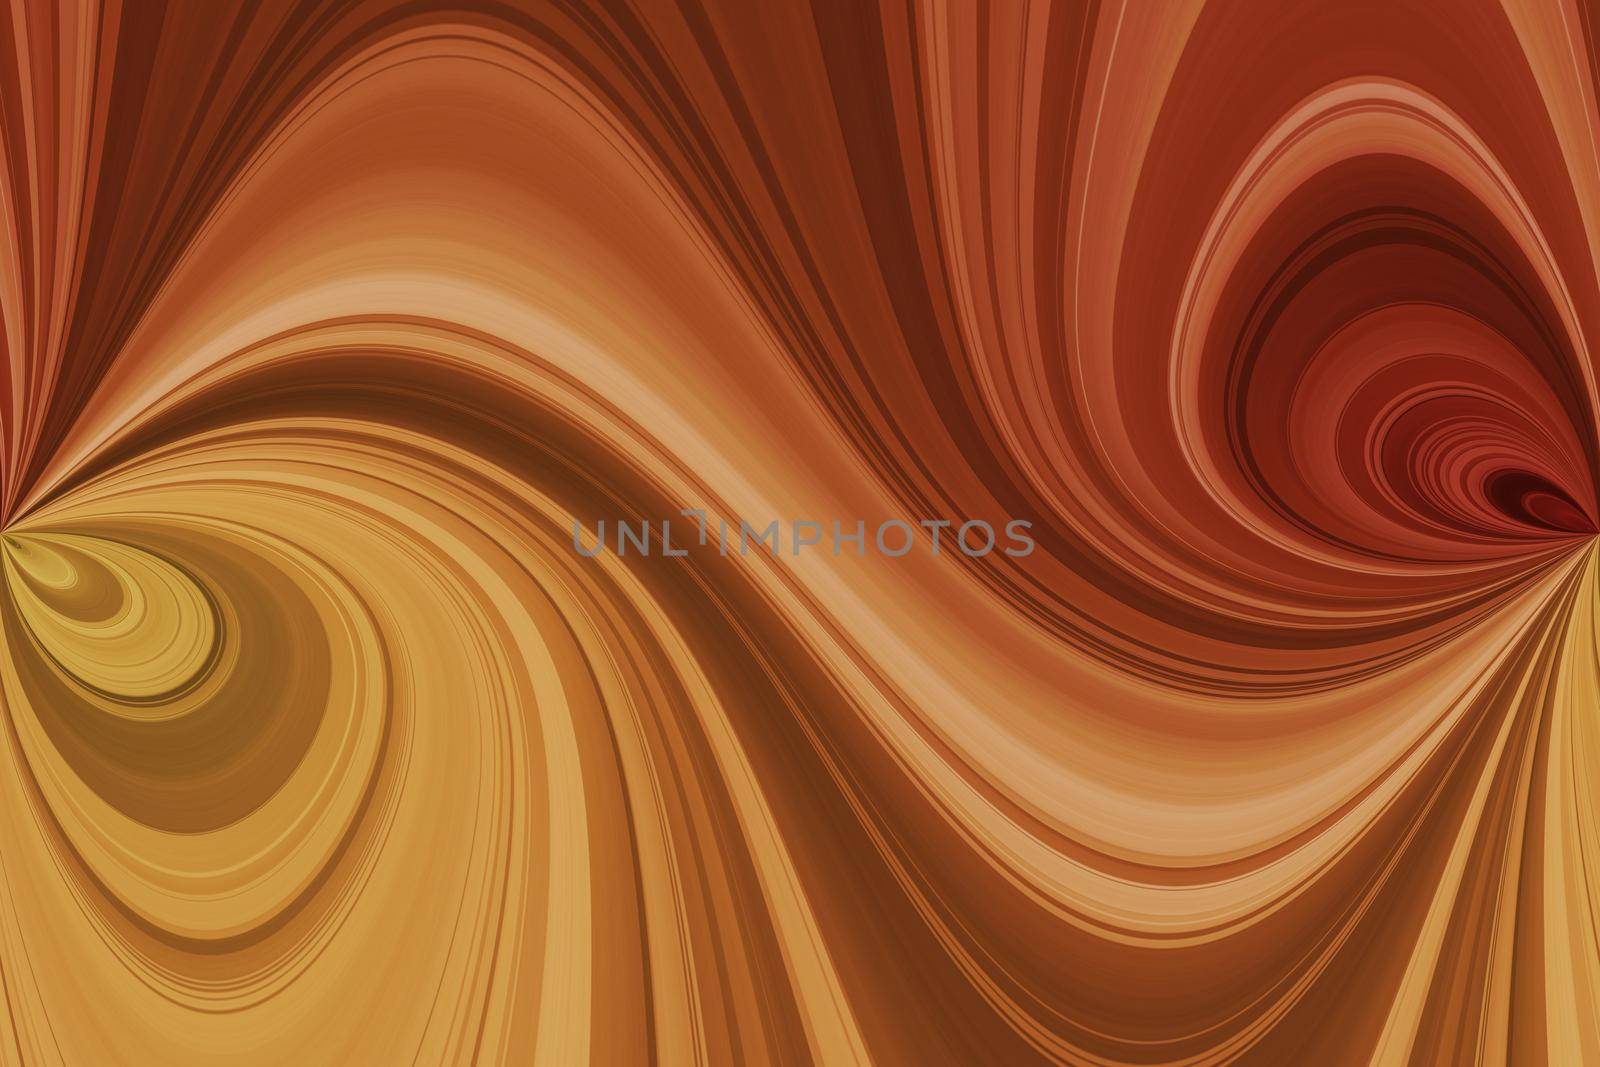 Variegated curved and swirling horizontal lines, light abstract background by Bezdnatm